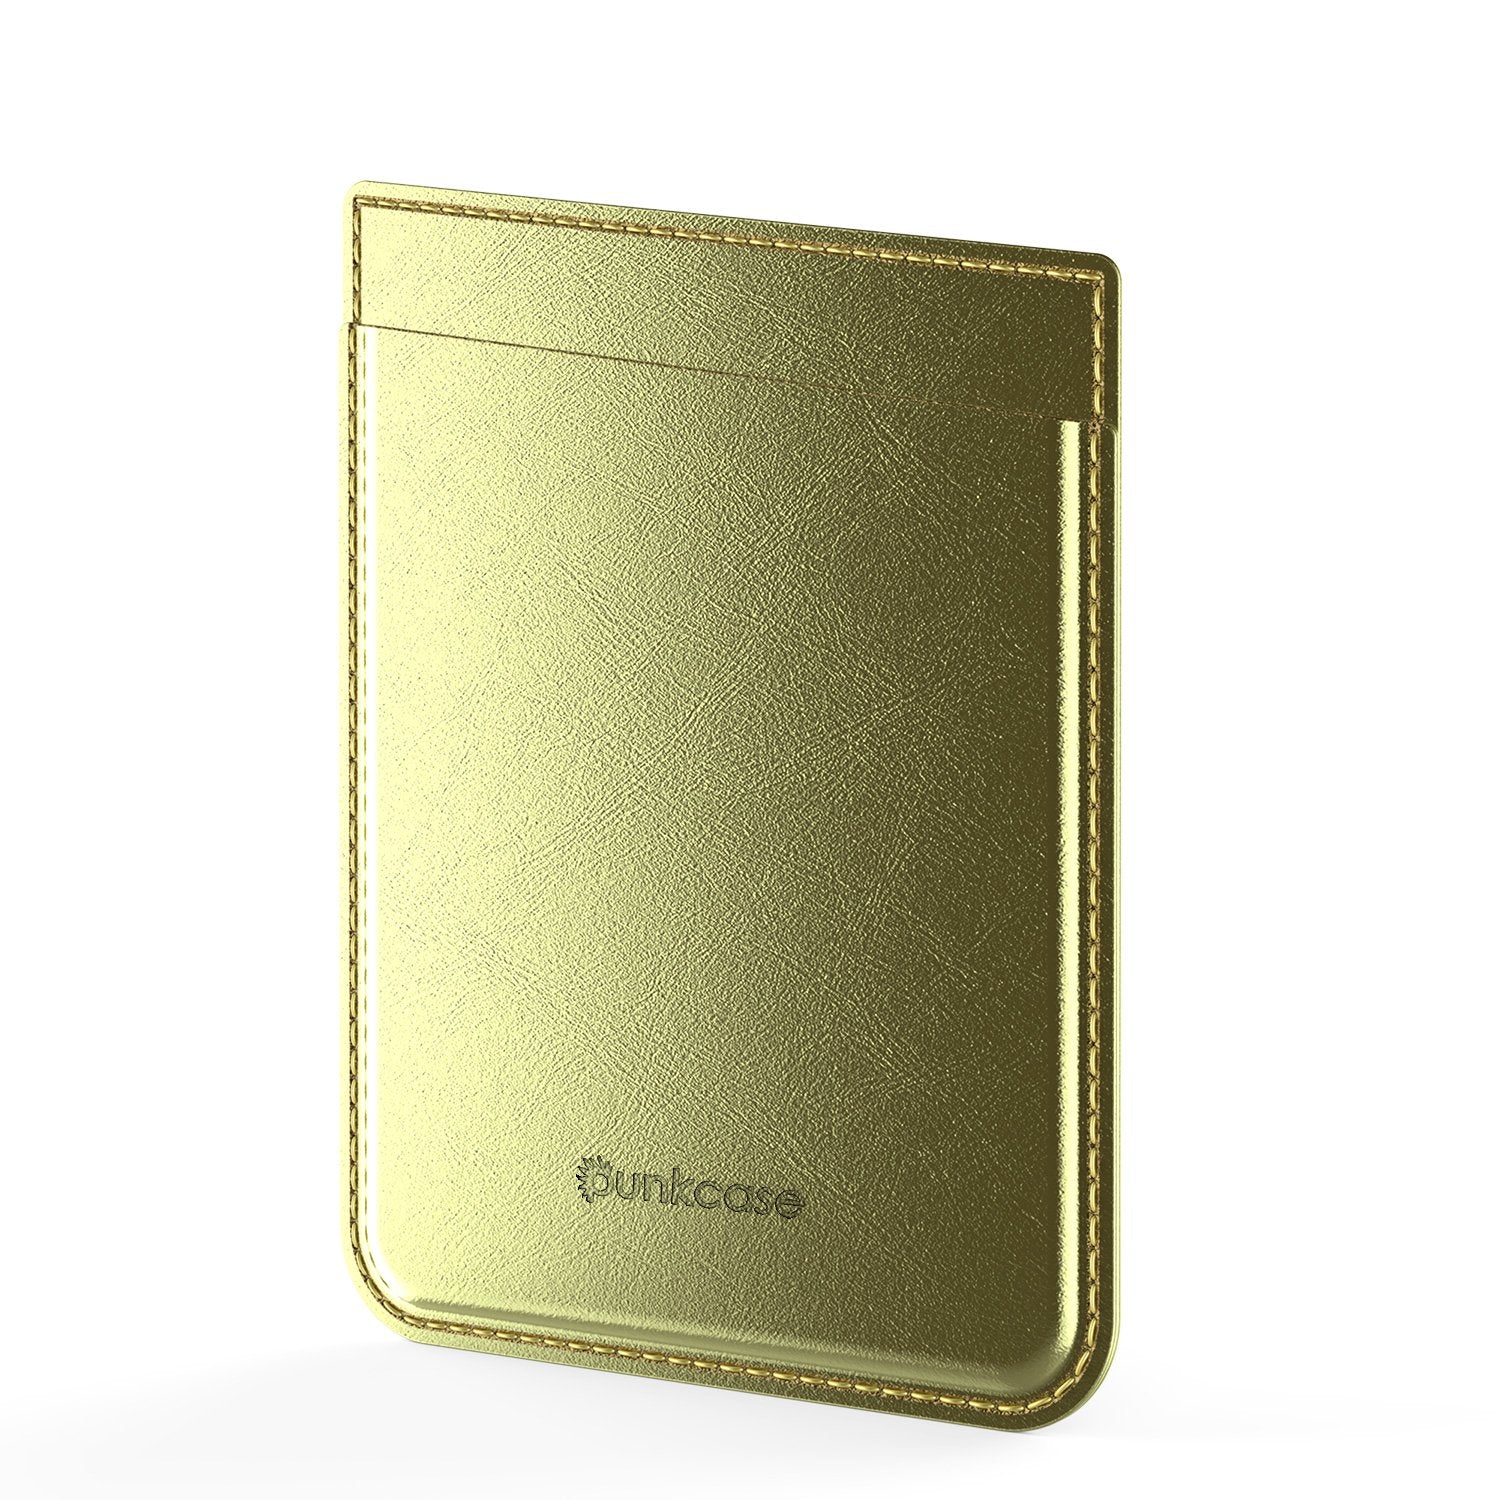 PunkCase CardStud Deluxe Stick On Wallet | Adhesive Card Holder Attachment for Back of iPhone, Android & More | Leather Pouch | [Gold]